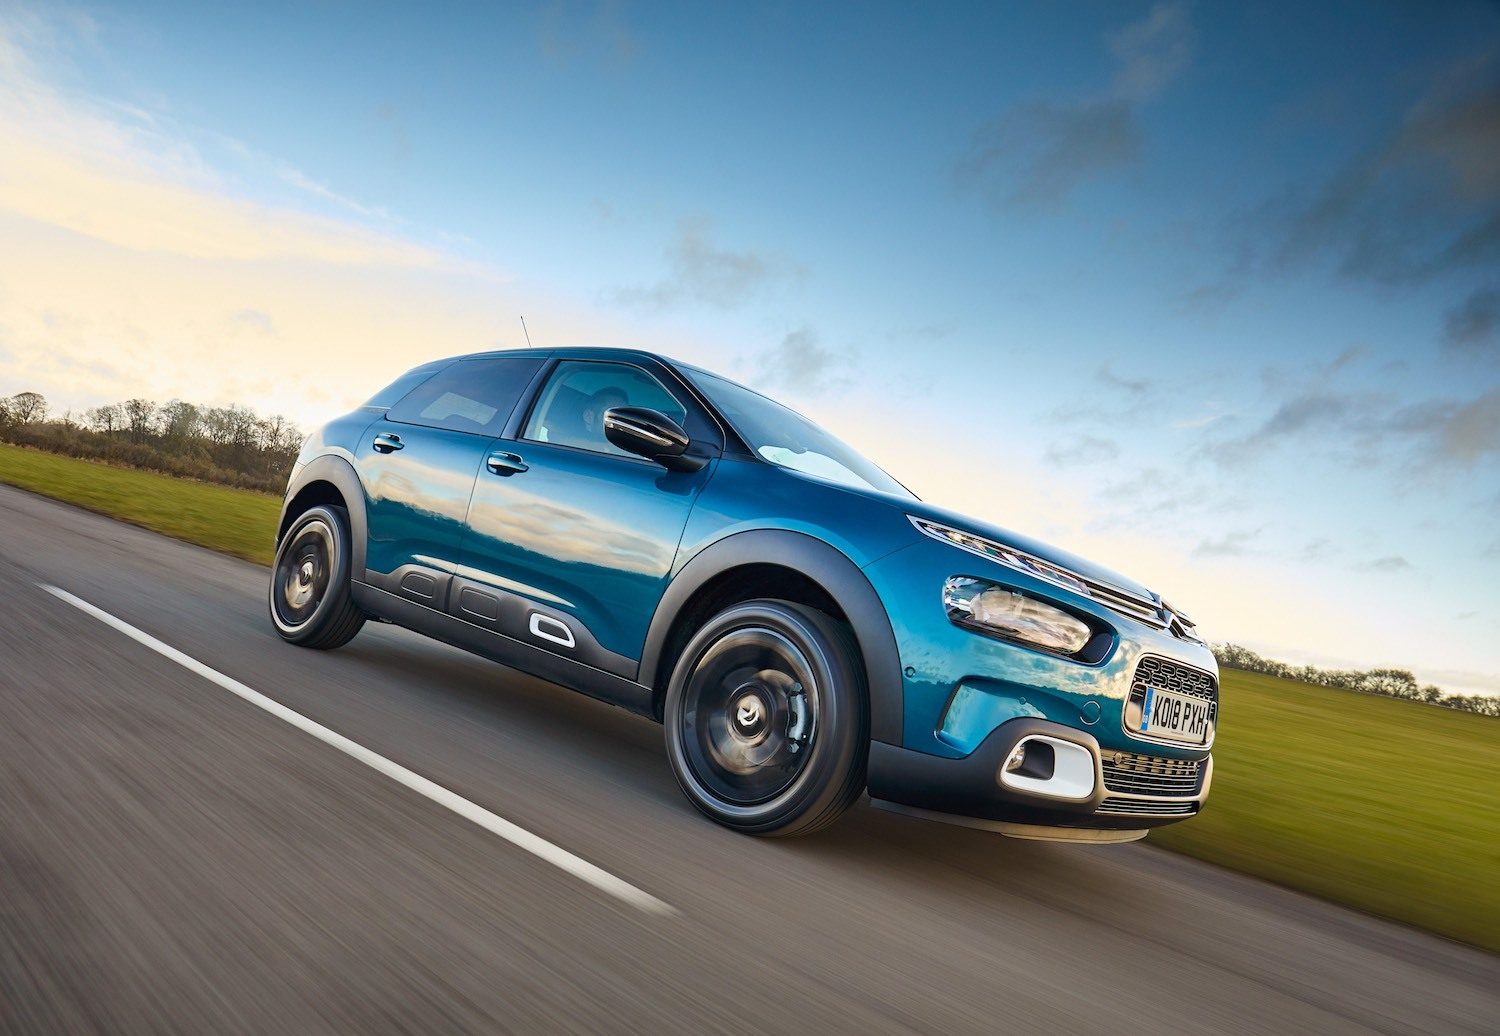 Tom Scanlan reviews the New Citroen Cactus for Drive 5